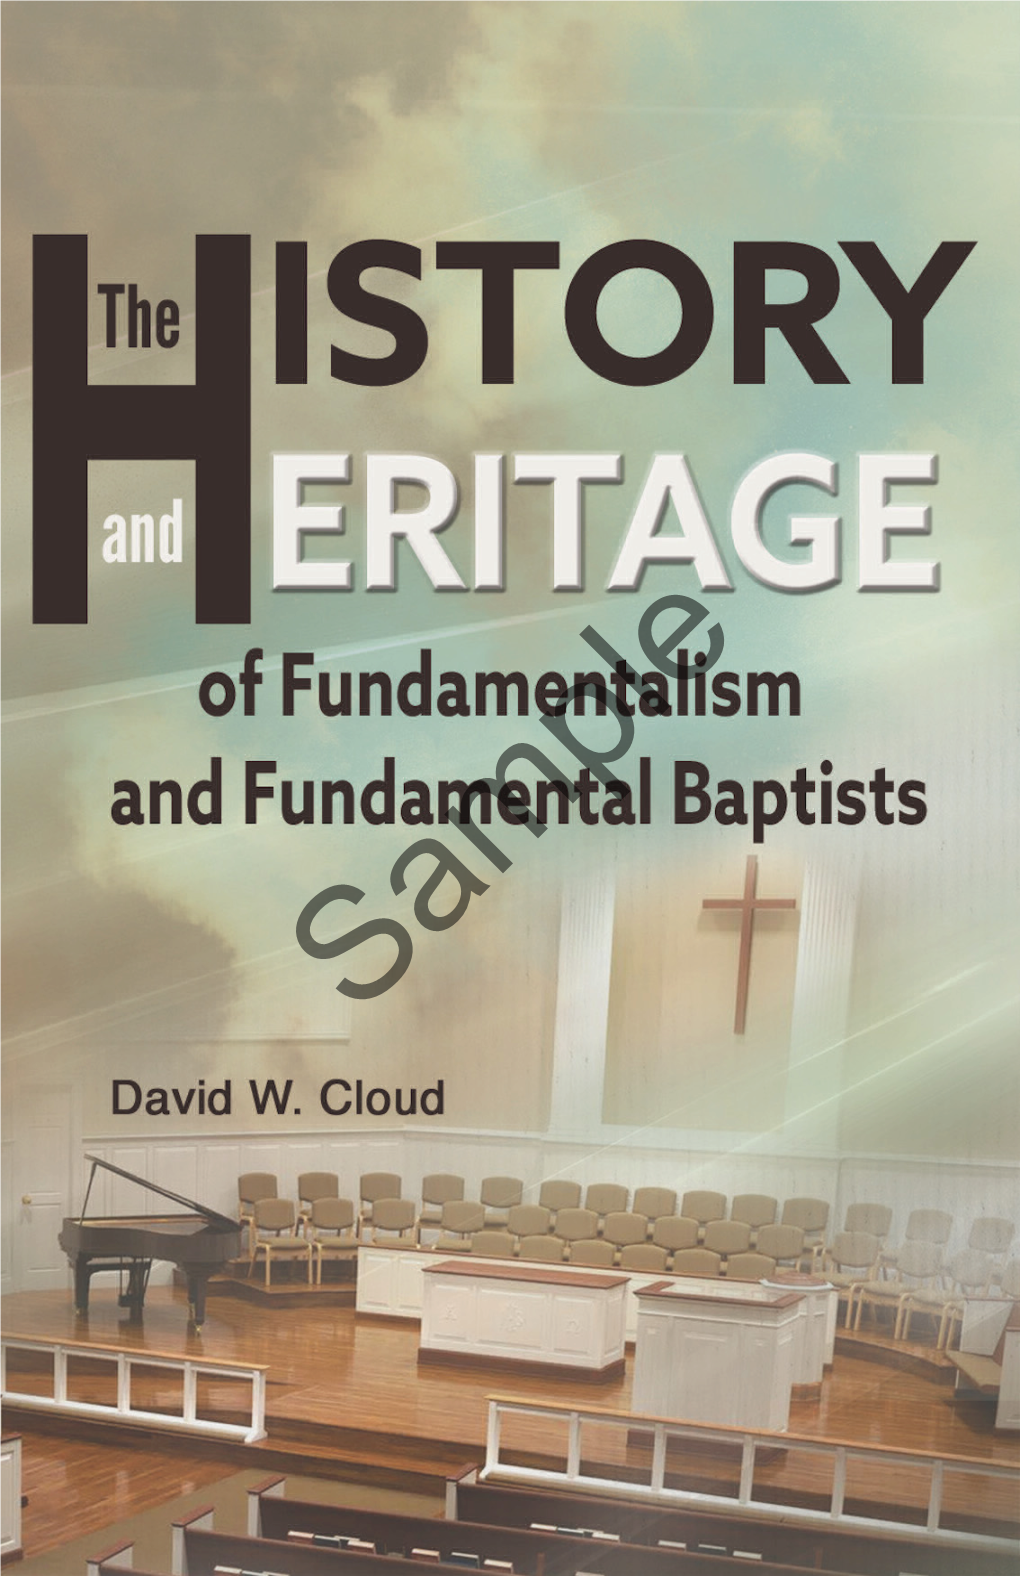 History and Heritage of Fundamentalism and Fundamental Baptists Copyright 2020 by David W